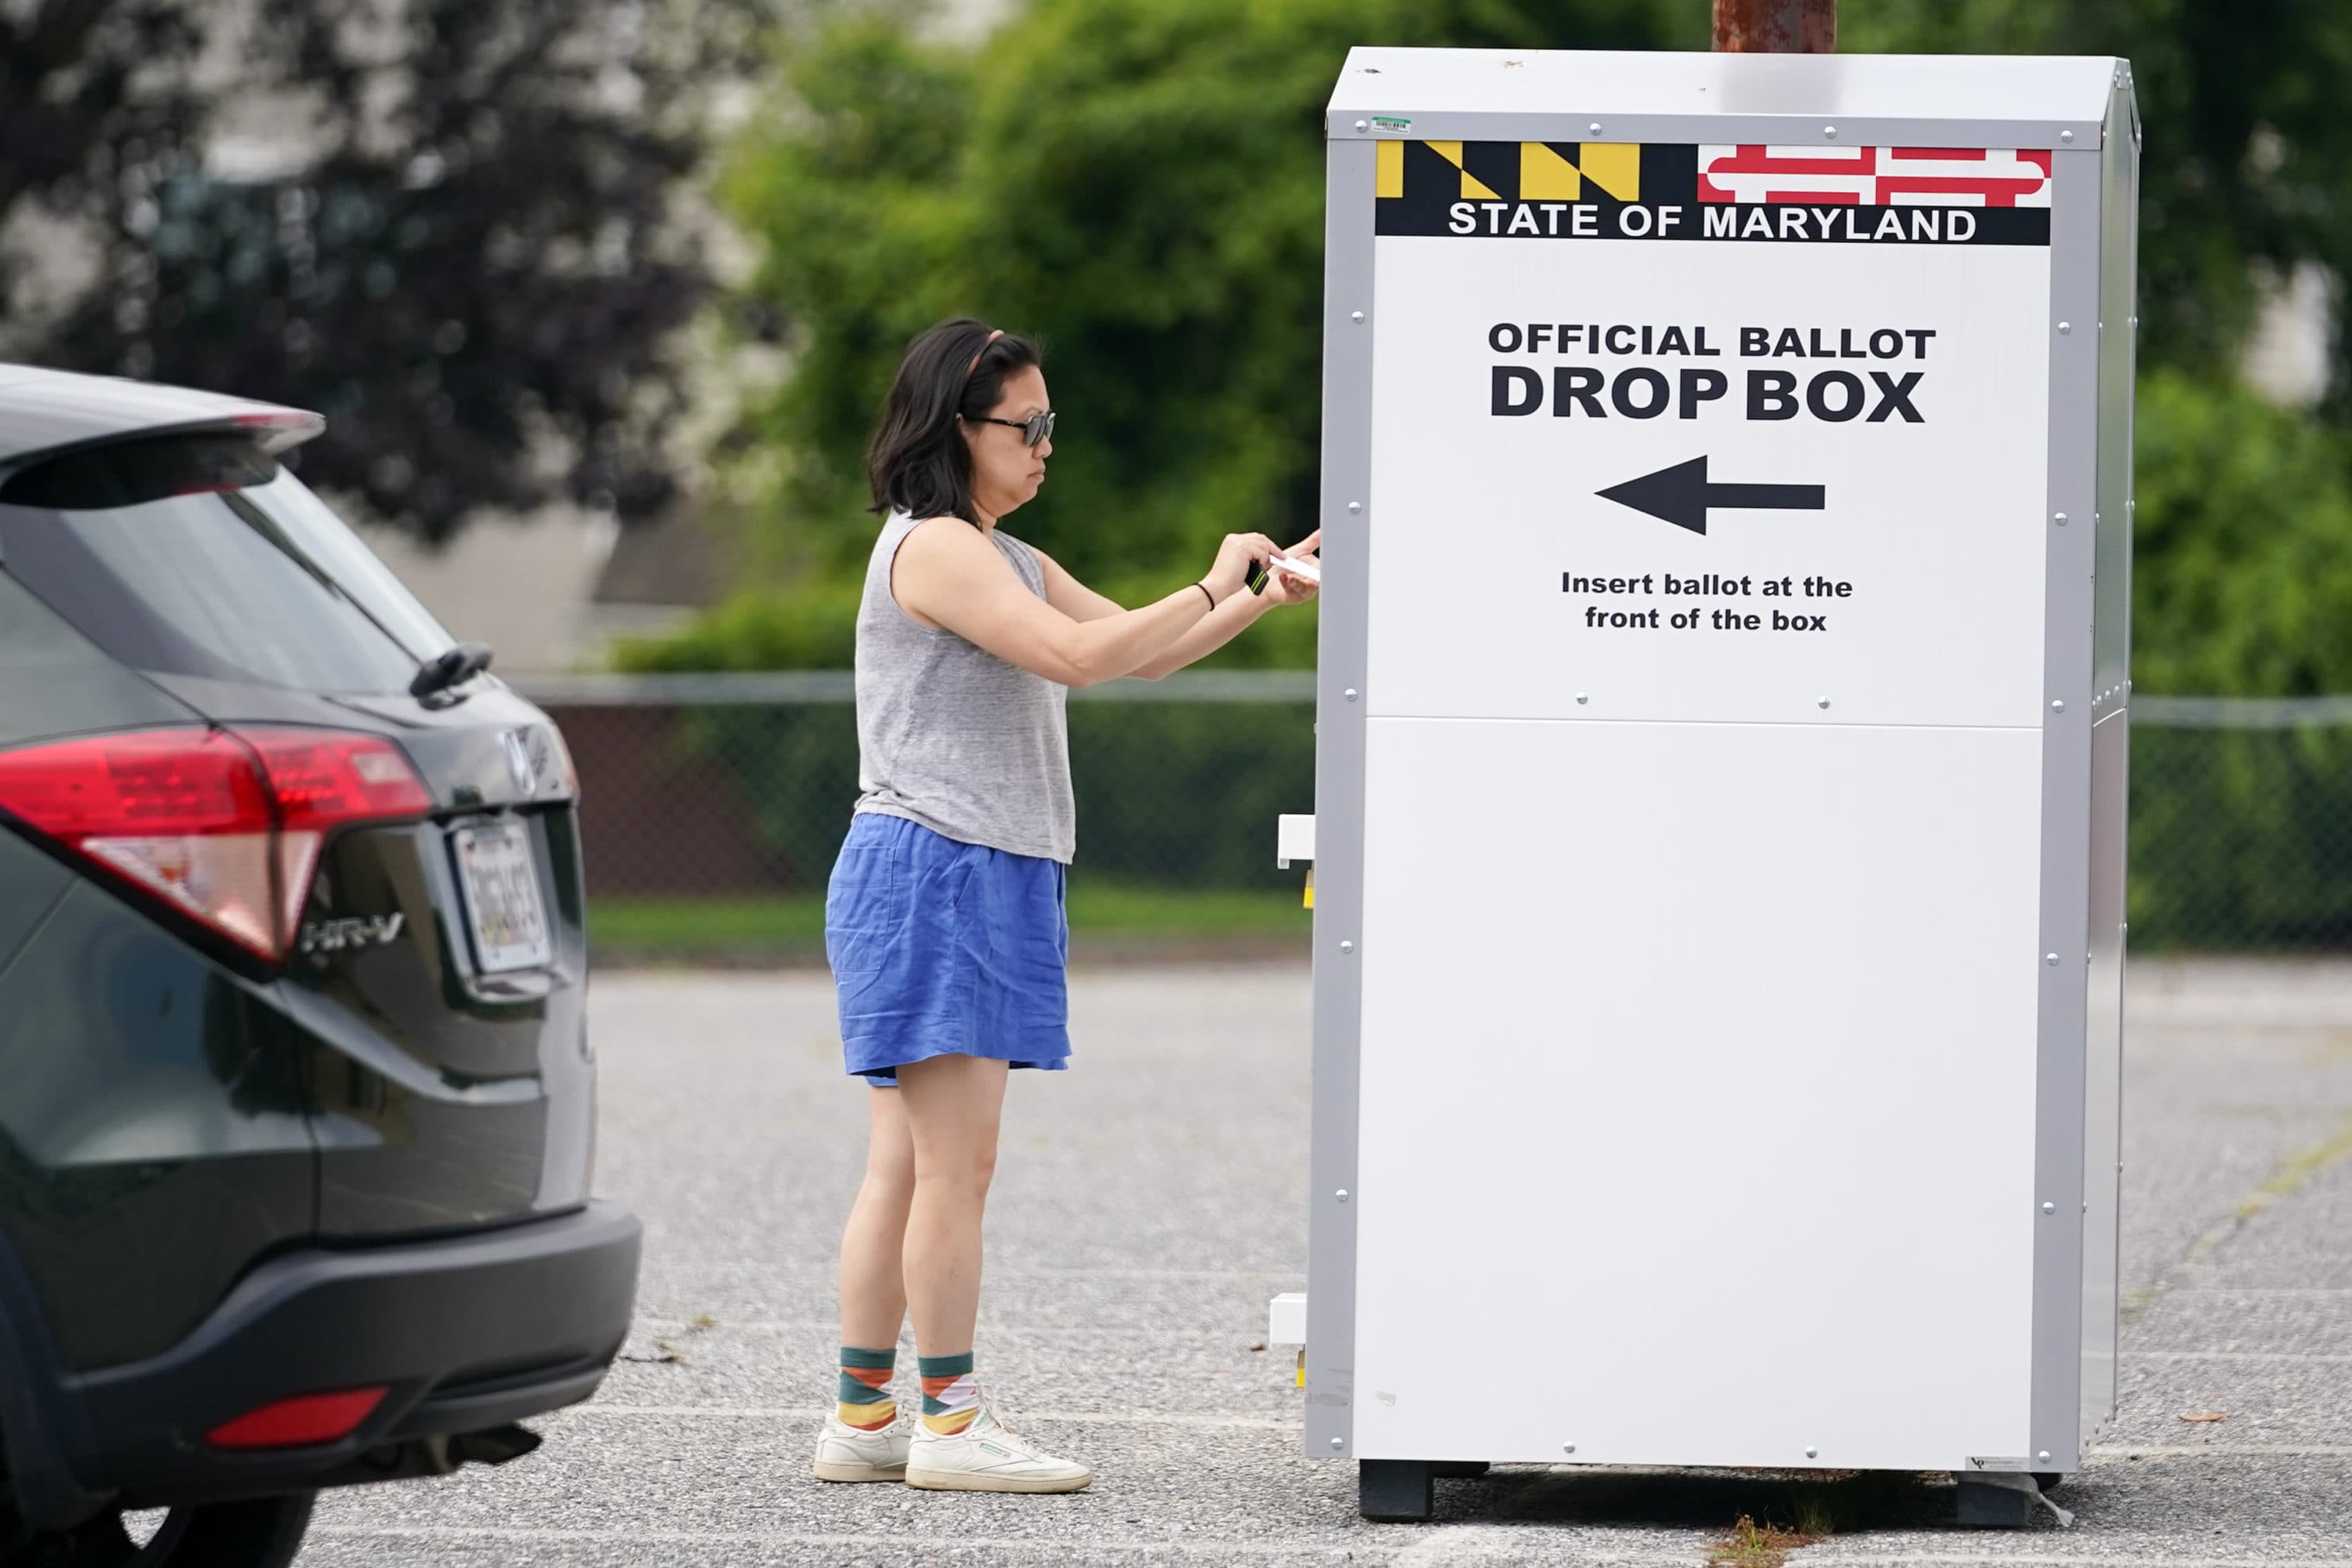 A woman drops a ballot into a drop box, casting her vote during Maryland's primary election, Tuesday, July 19, 2022, in Baltimore. (Julio Cortez/AP)